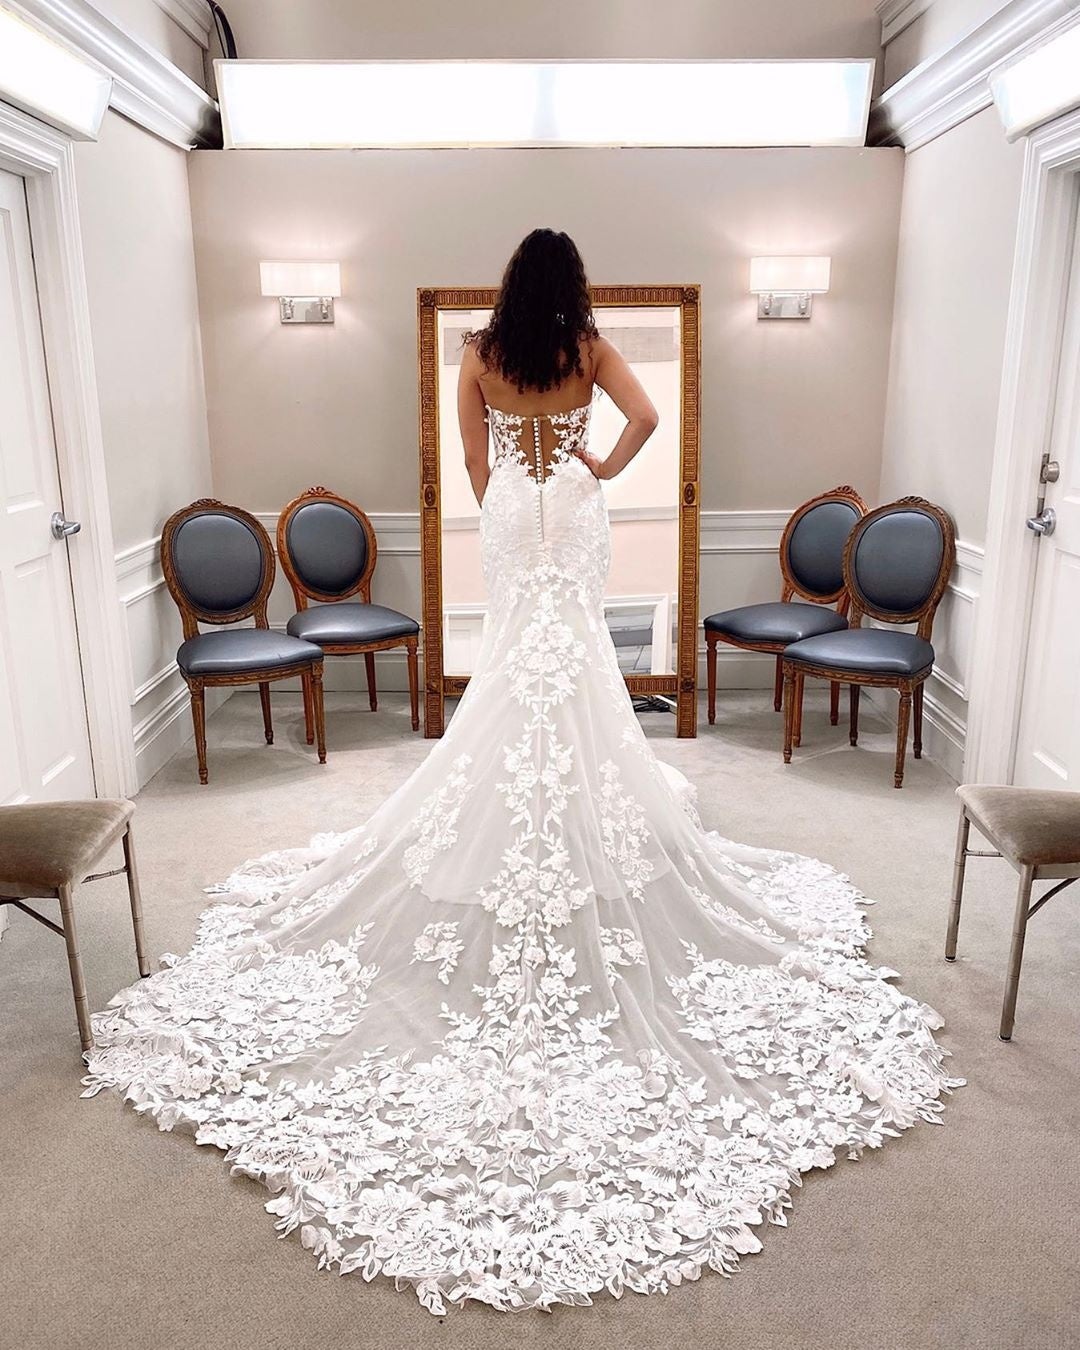 Wedding Dress Customizations Brides Need to Know About